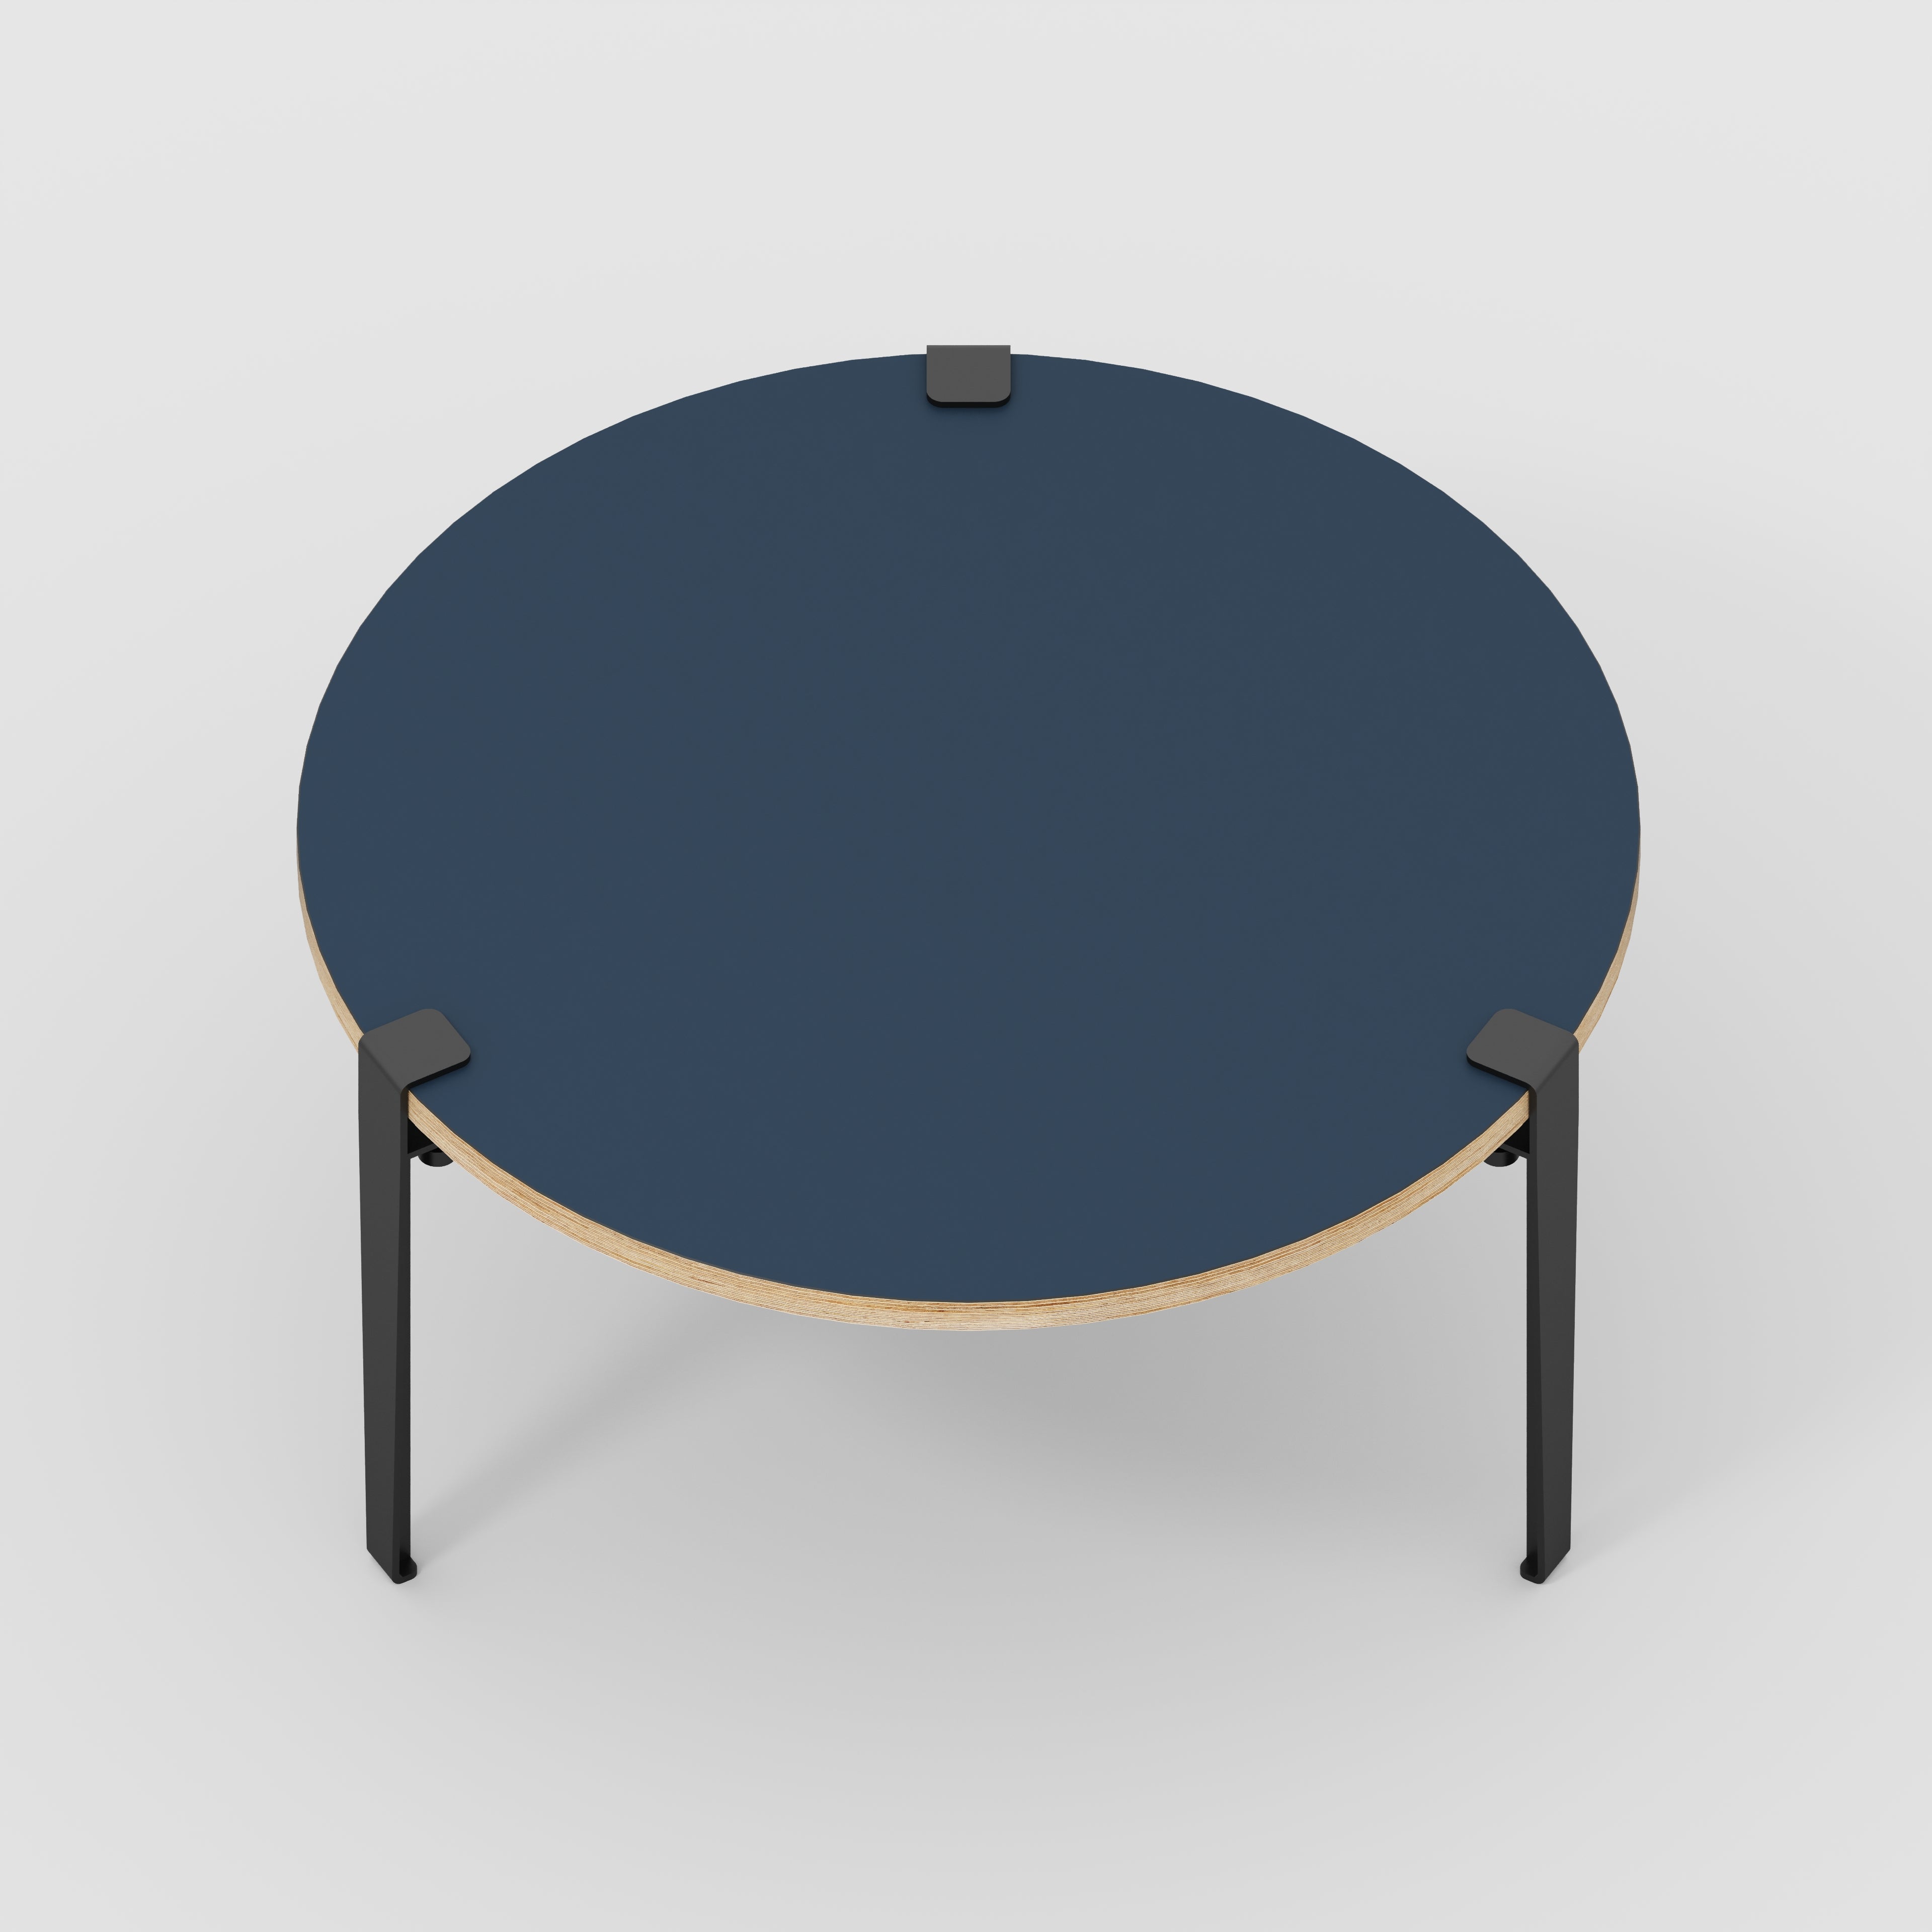 Round Coffee Table with Black Tiptoe Legs - Formica Night Sea Blue - 800(dia) x 430(h)